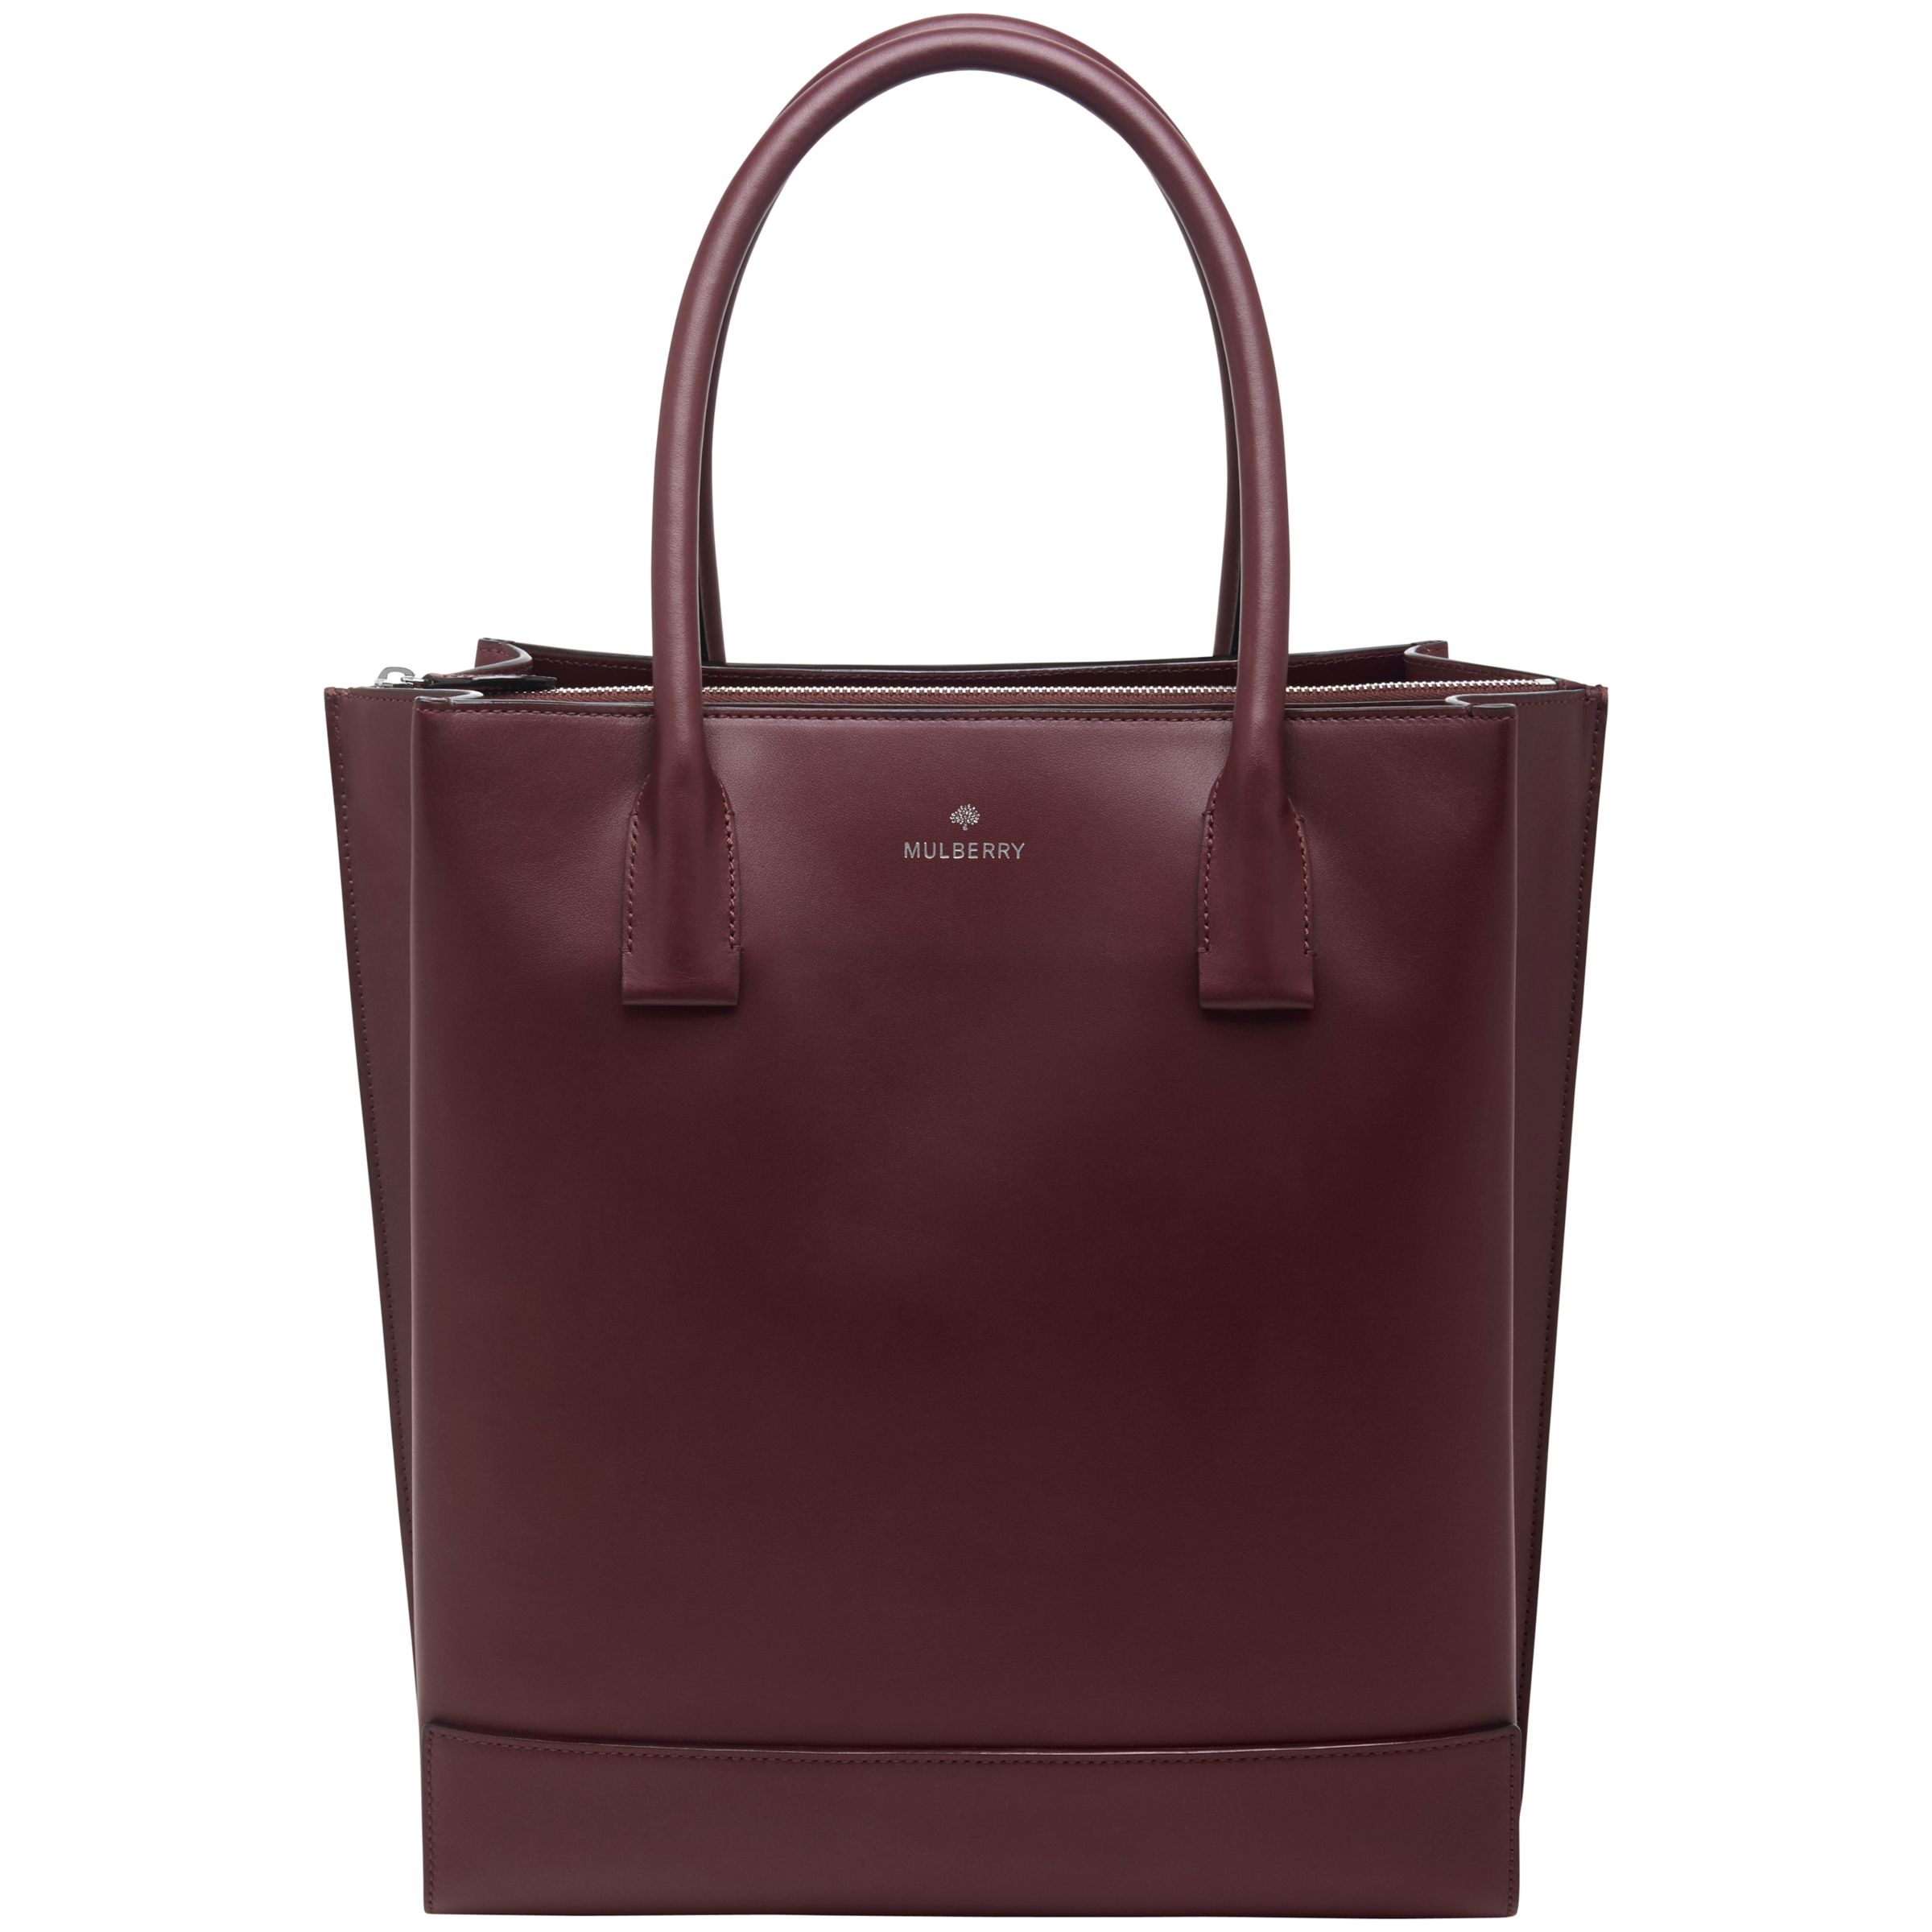 Mulberry Arundel Leather Tote Bag, Oxblood